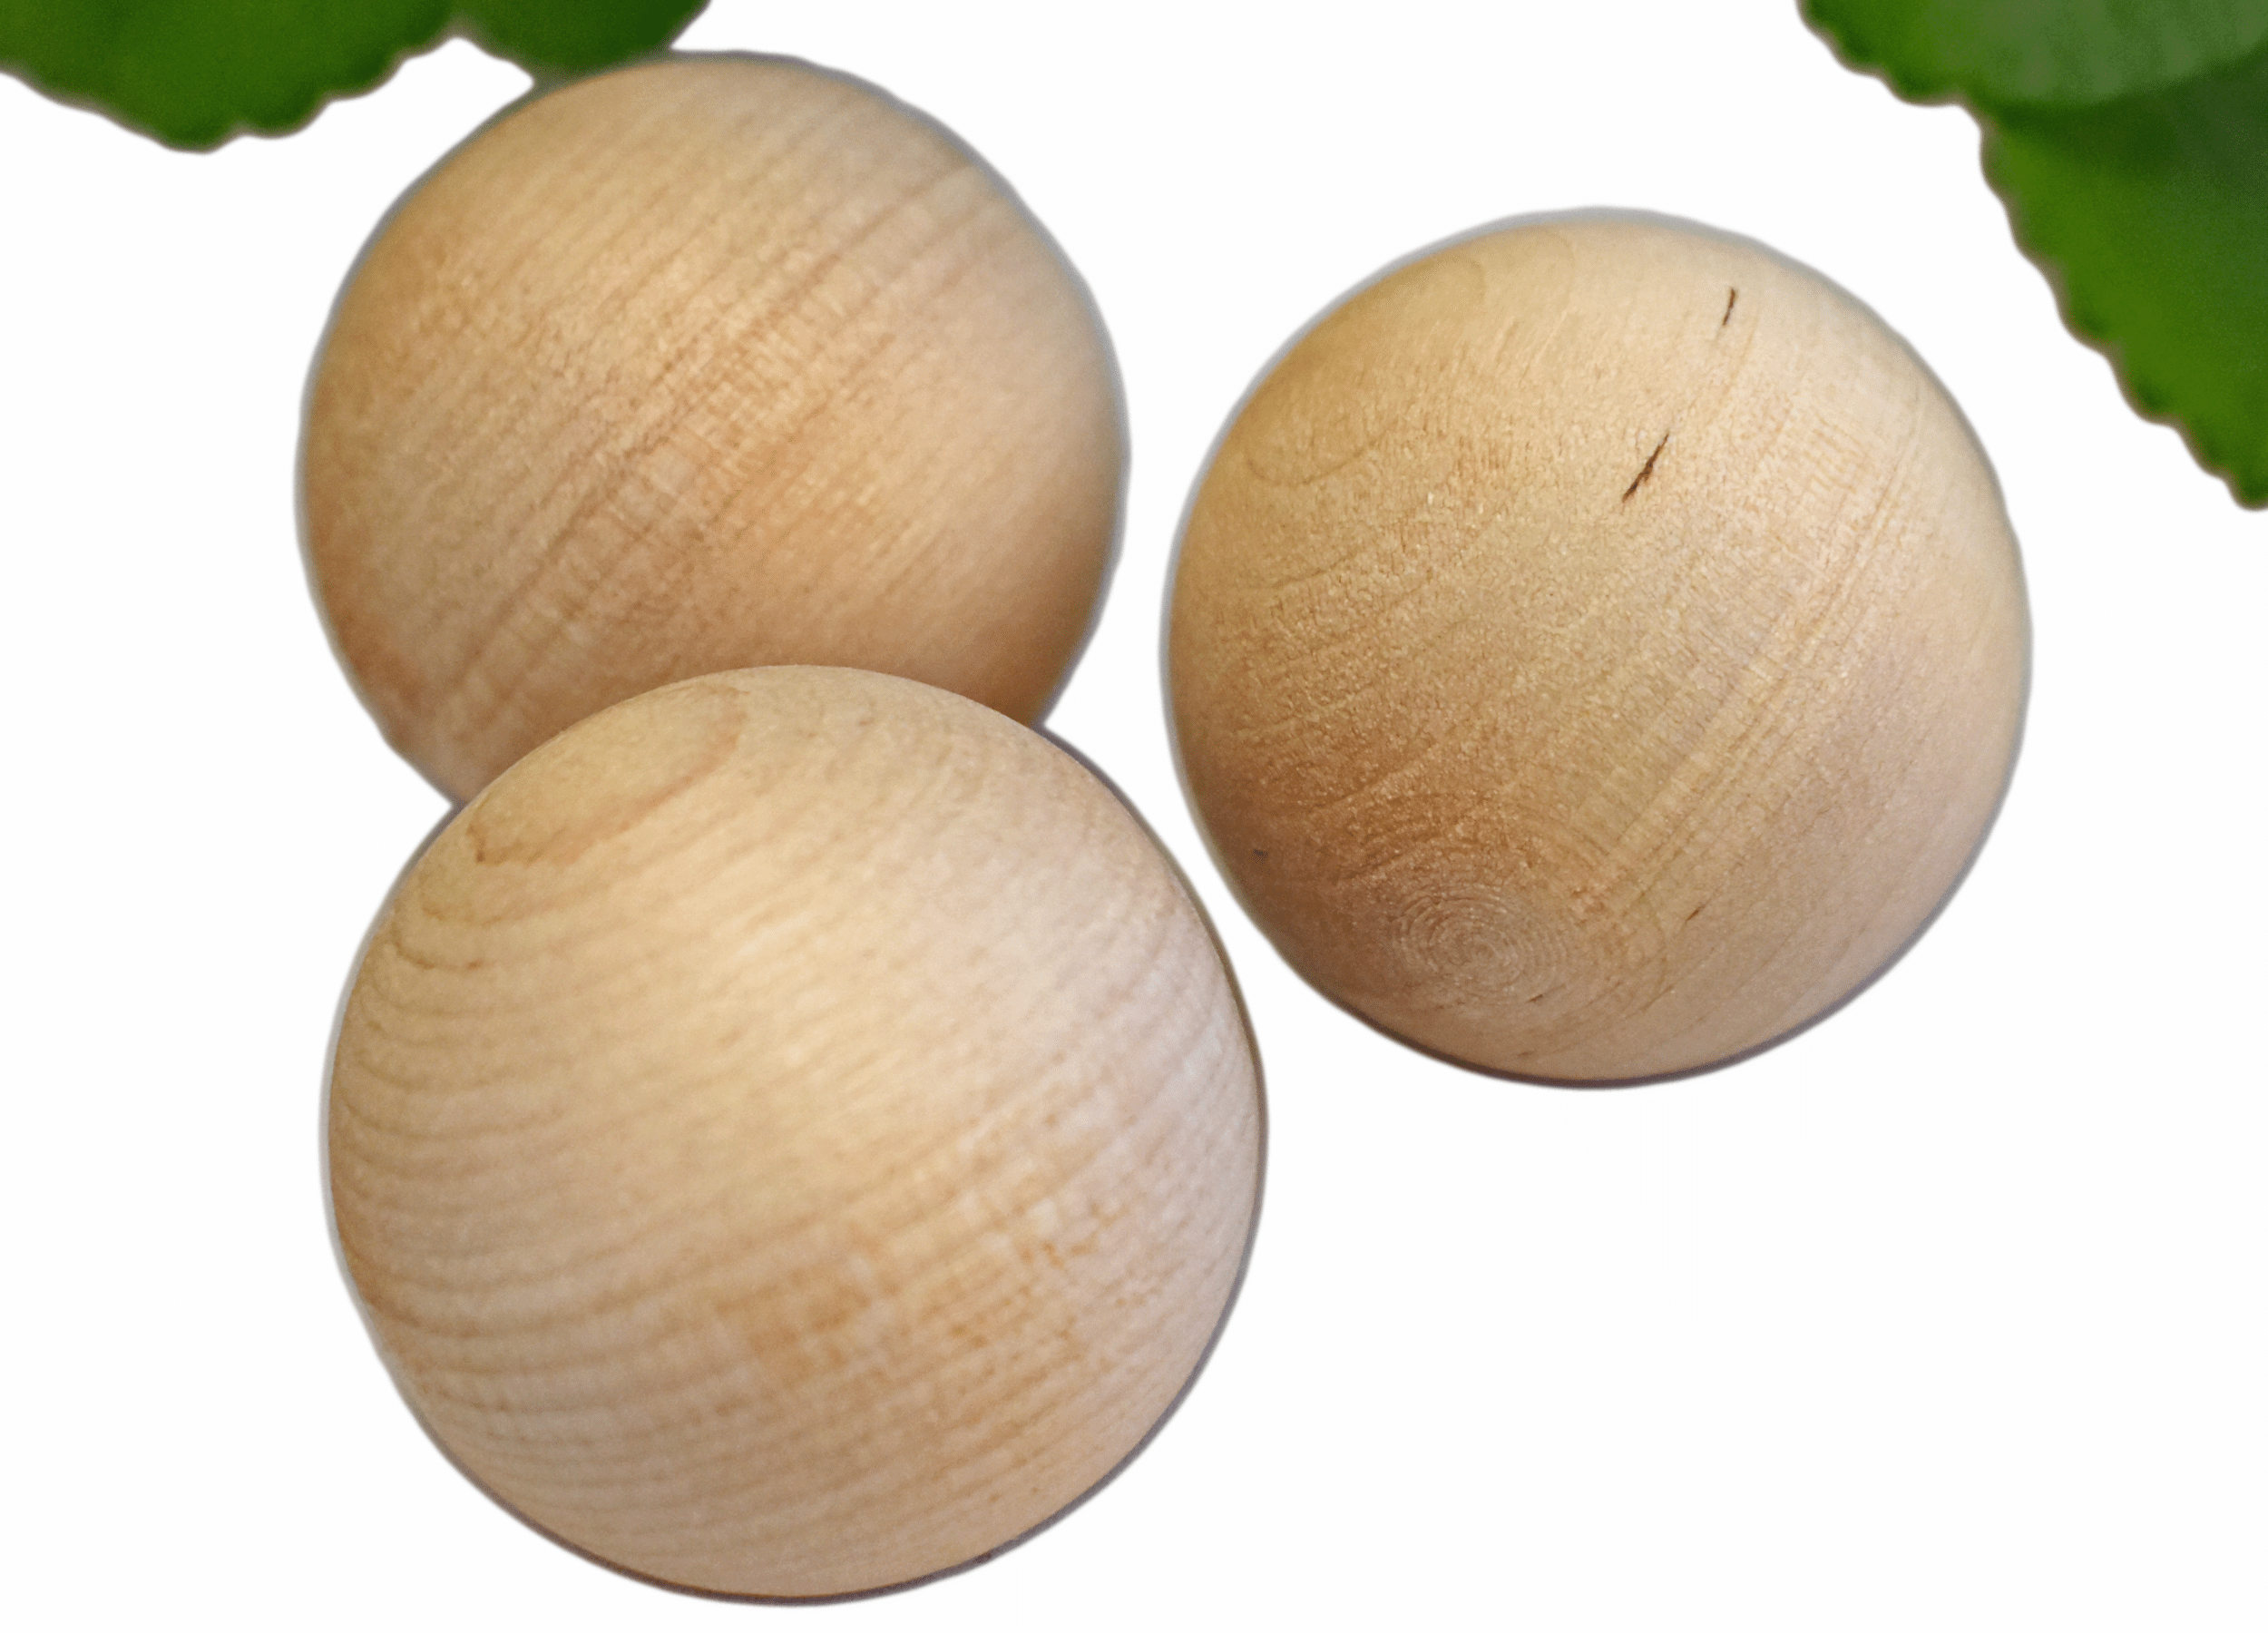 Wholesale Other Arts And Crafts 2 Inch Wooden Round Ball Bag Of 2  Unfinished Natural Hardwood Balls Smooth Birch Balls For DIY Projects From  Santi, $0.86